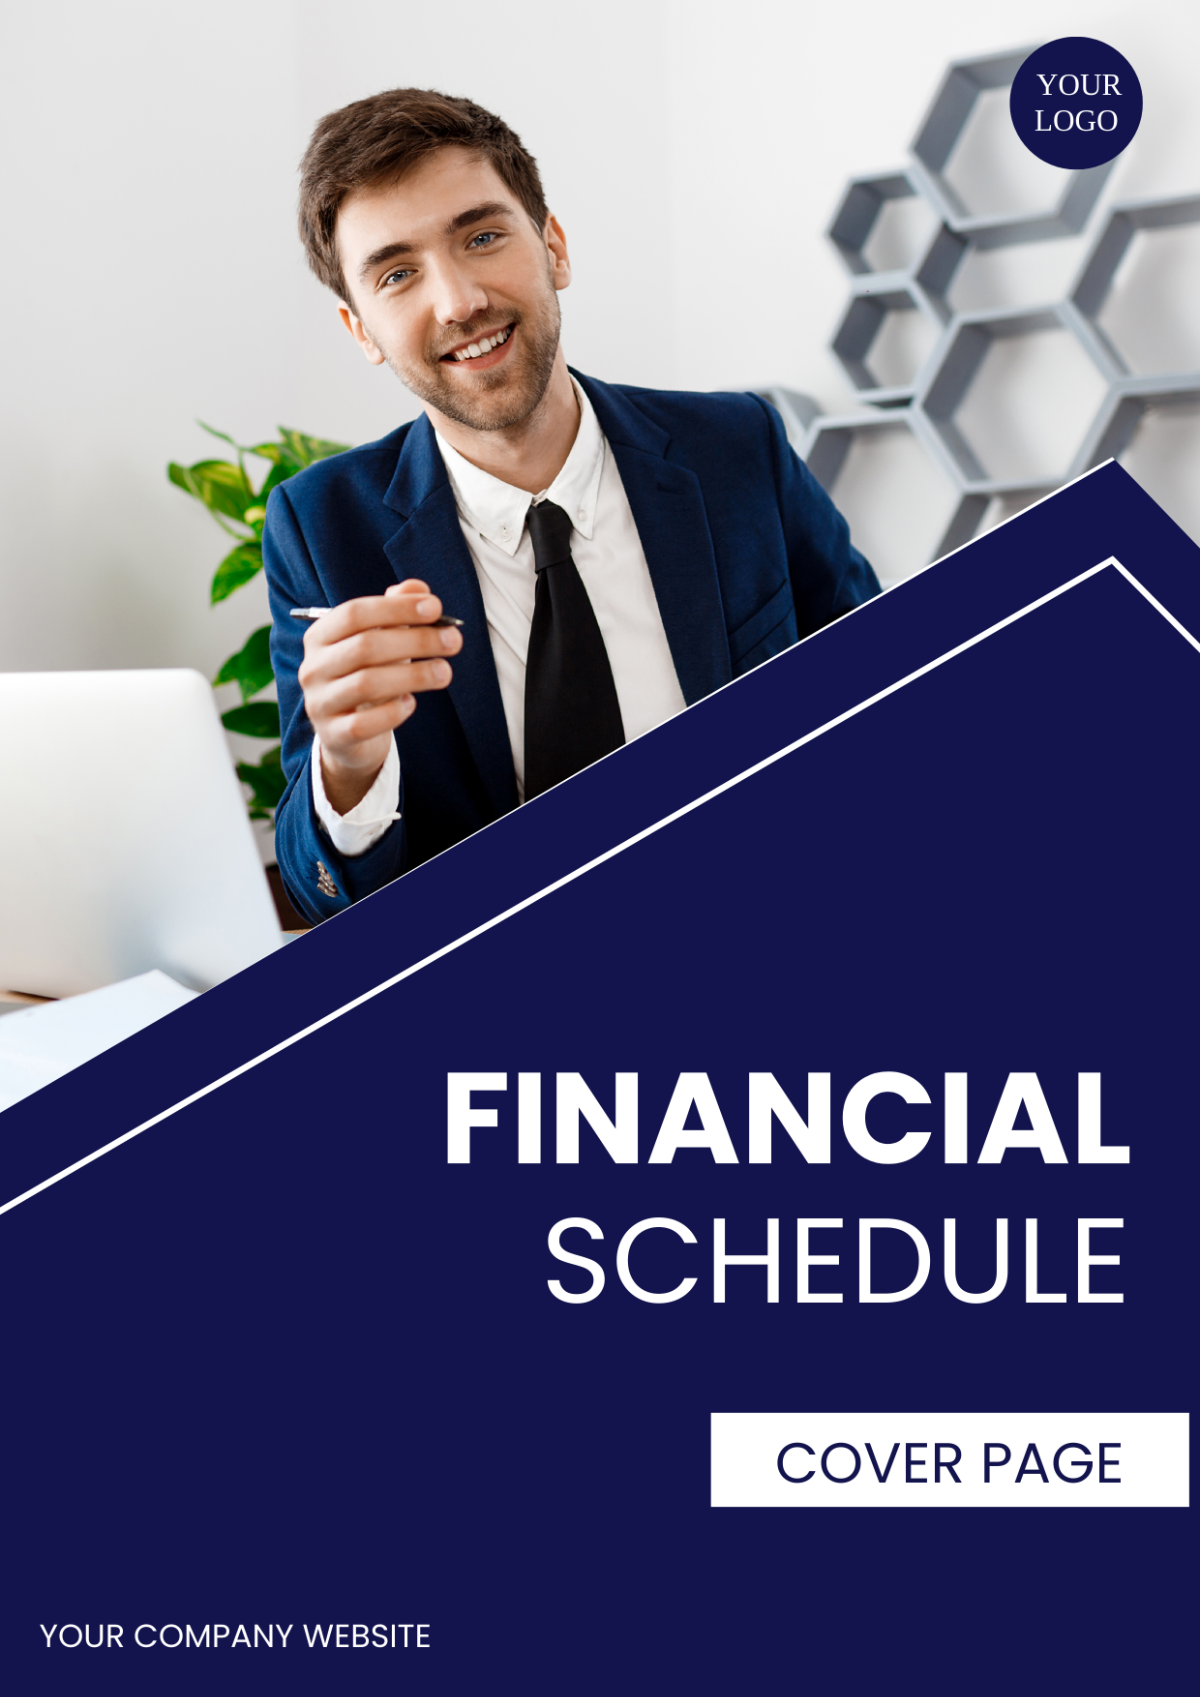 Financial Schedule Cover Page